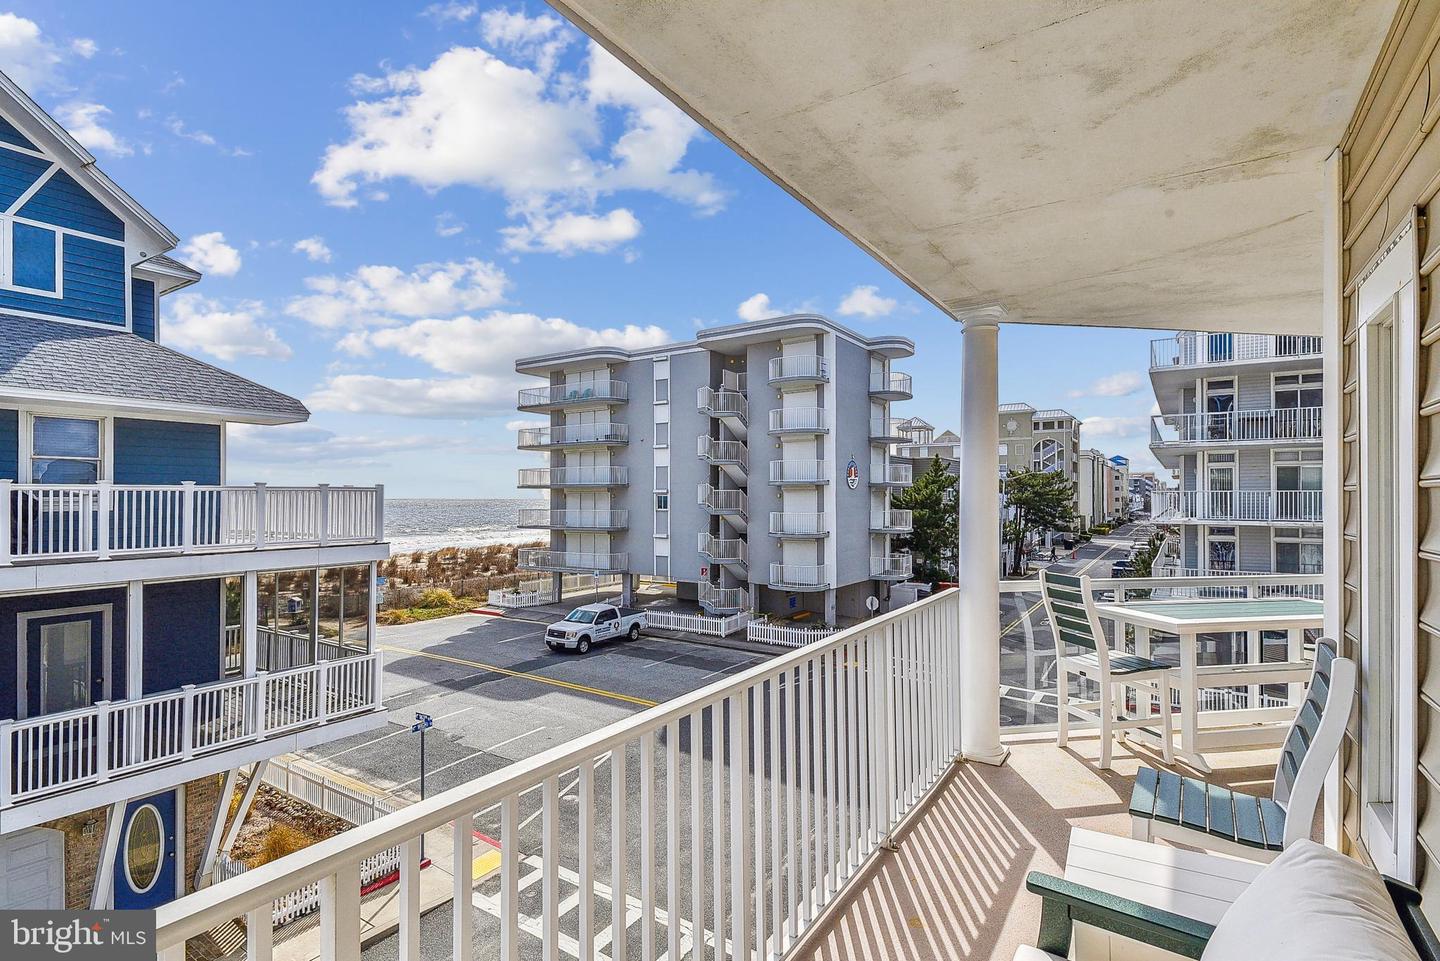 MDWO2019340-802918959778-2024-03-12-11-41-08 14301 Wight St #201 | Ocean City, MD Real Estate For Sale | MLS# Mdwo2019340  - 1st Choice Properties